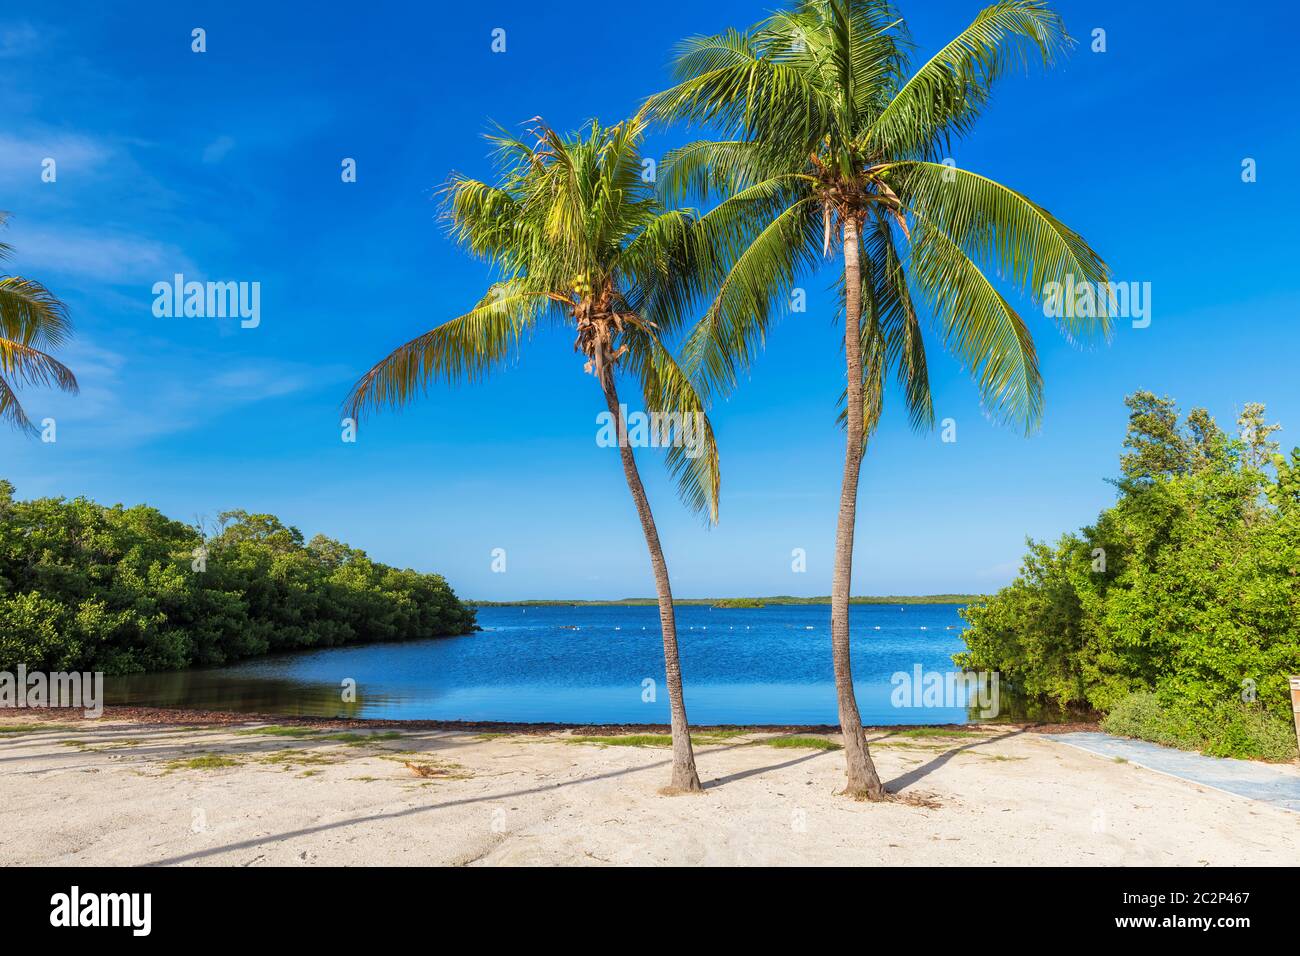 Palm trees on a tropical beach in Florida Keys. Stock Photo